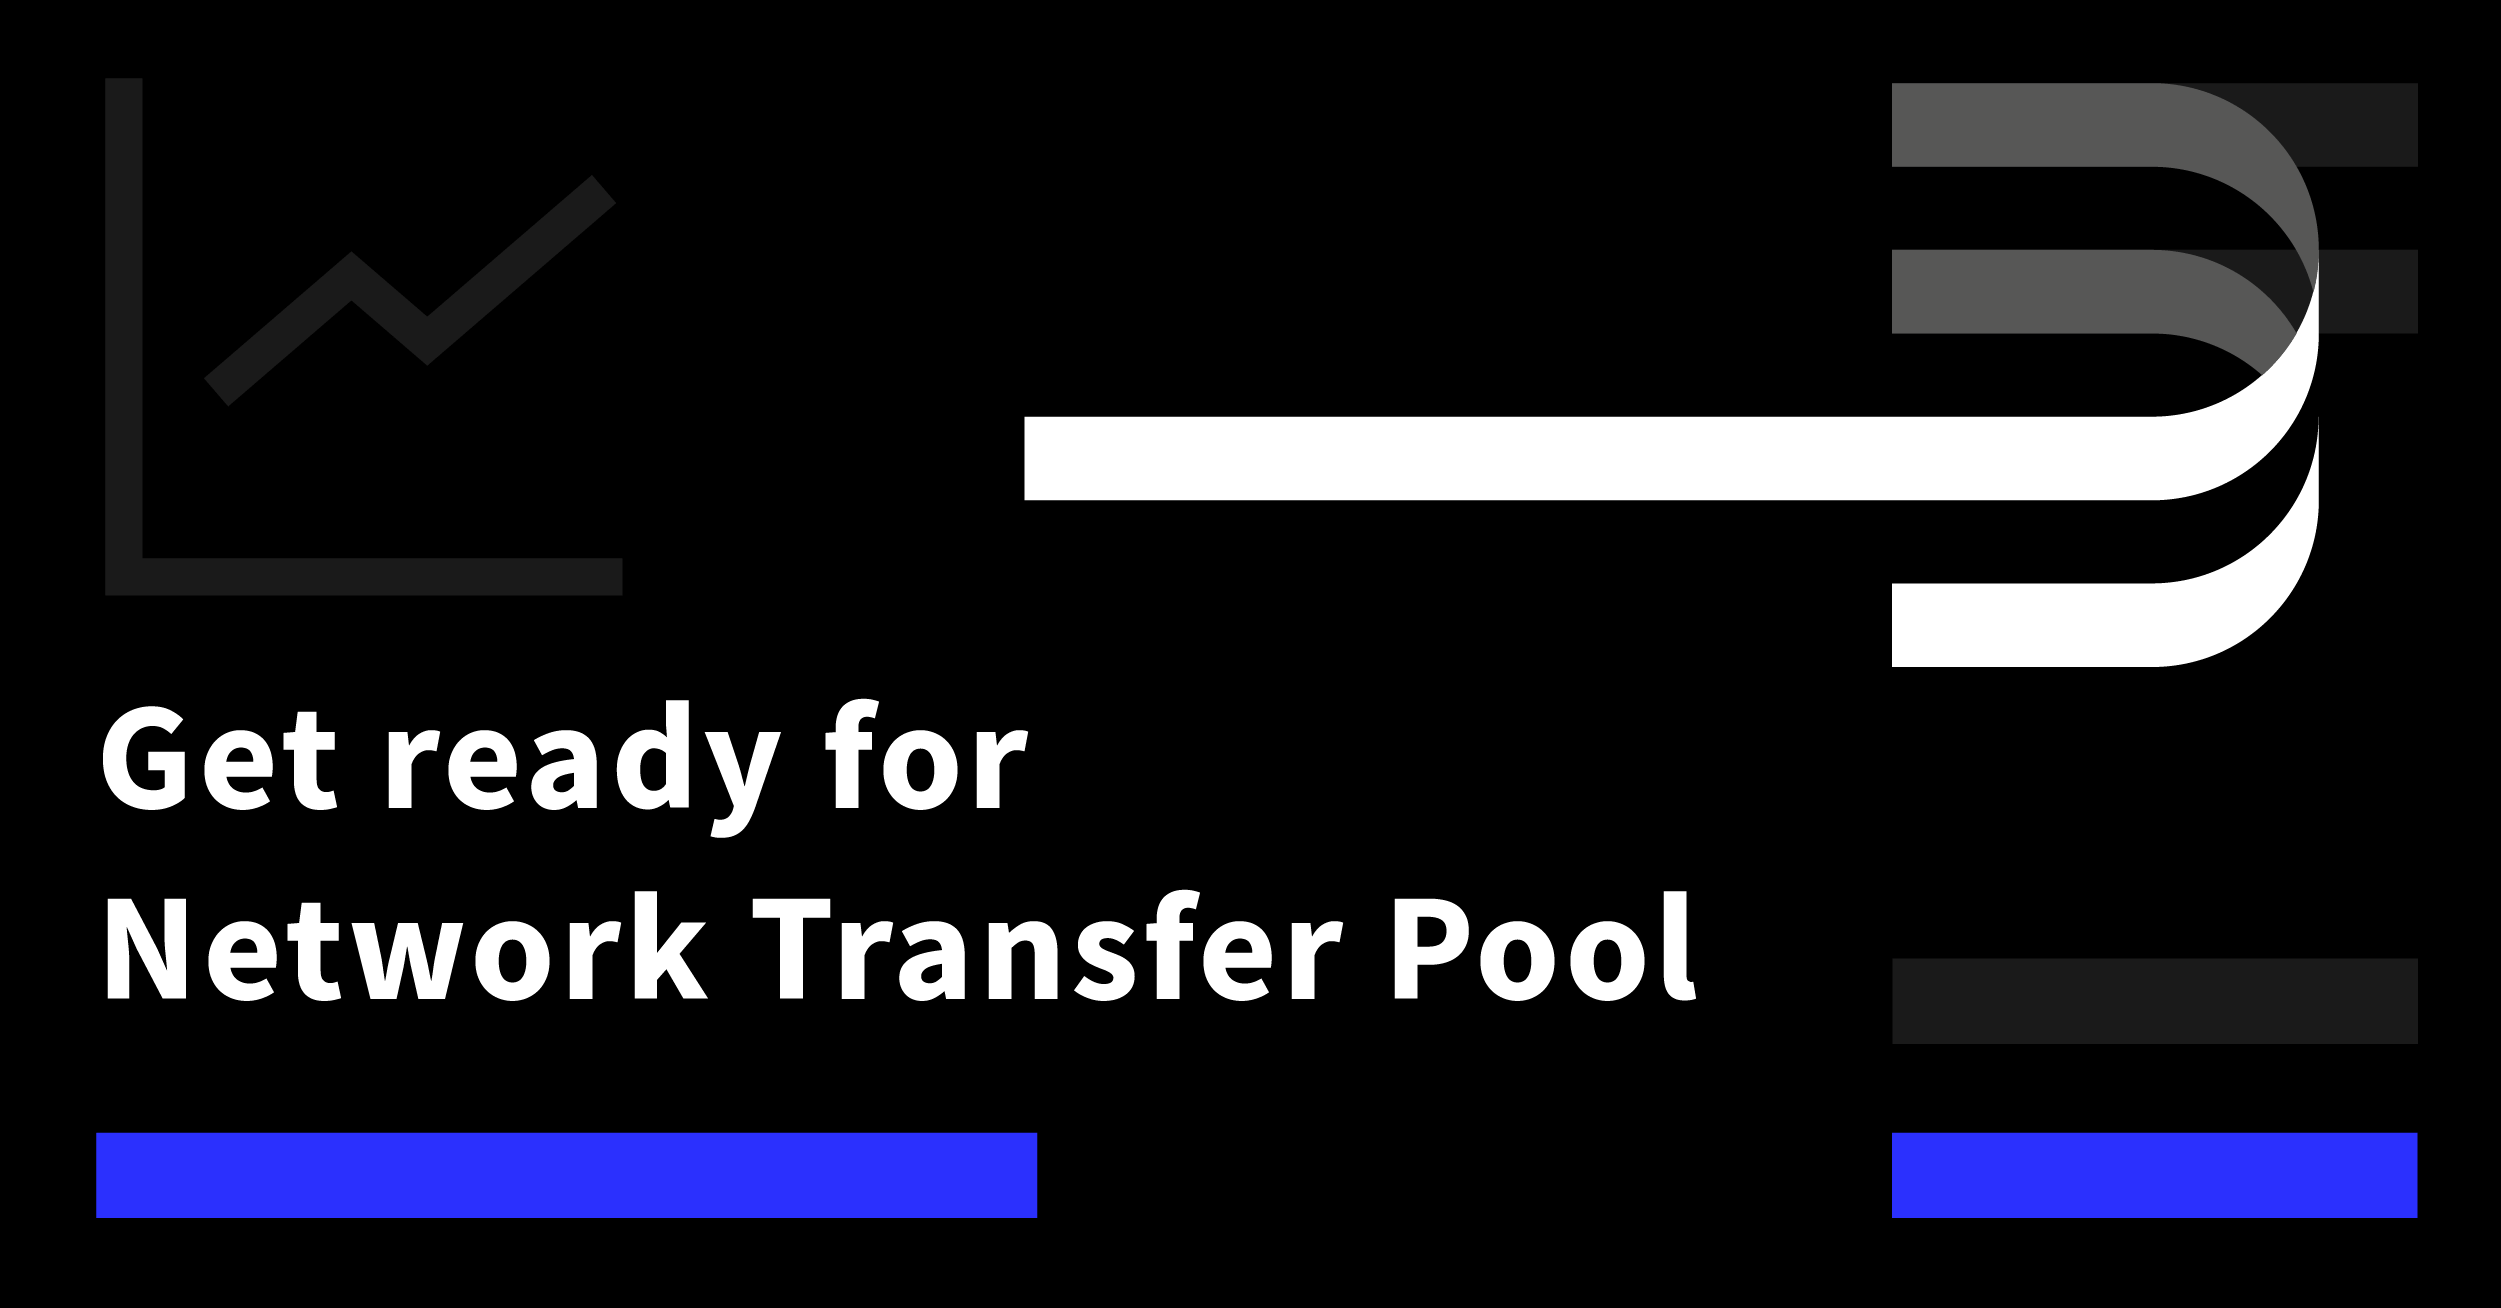 Network Transfer Pool featured